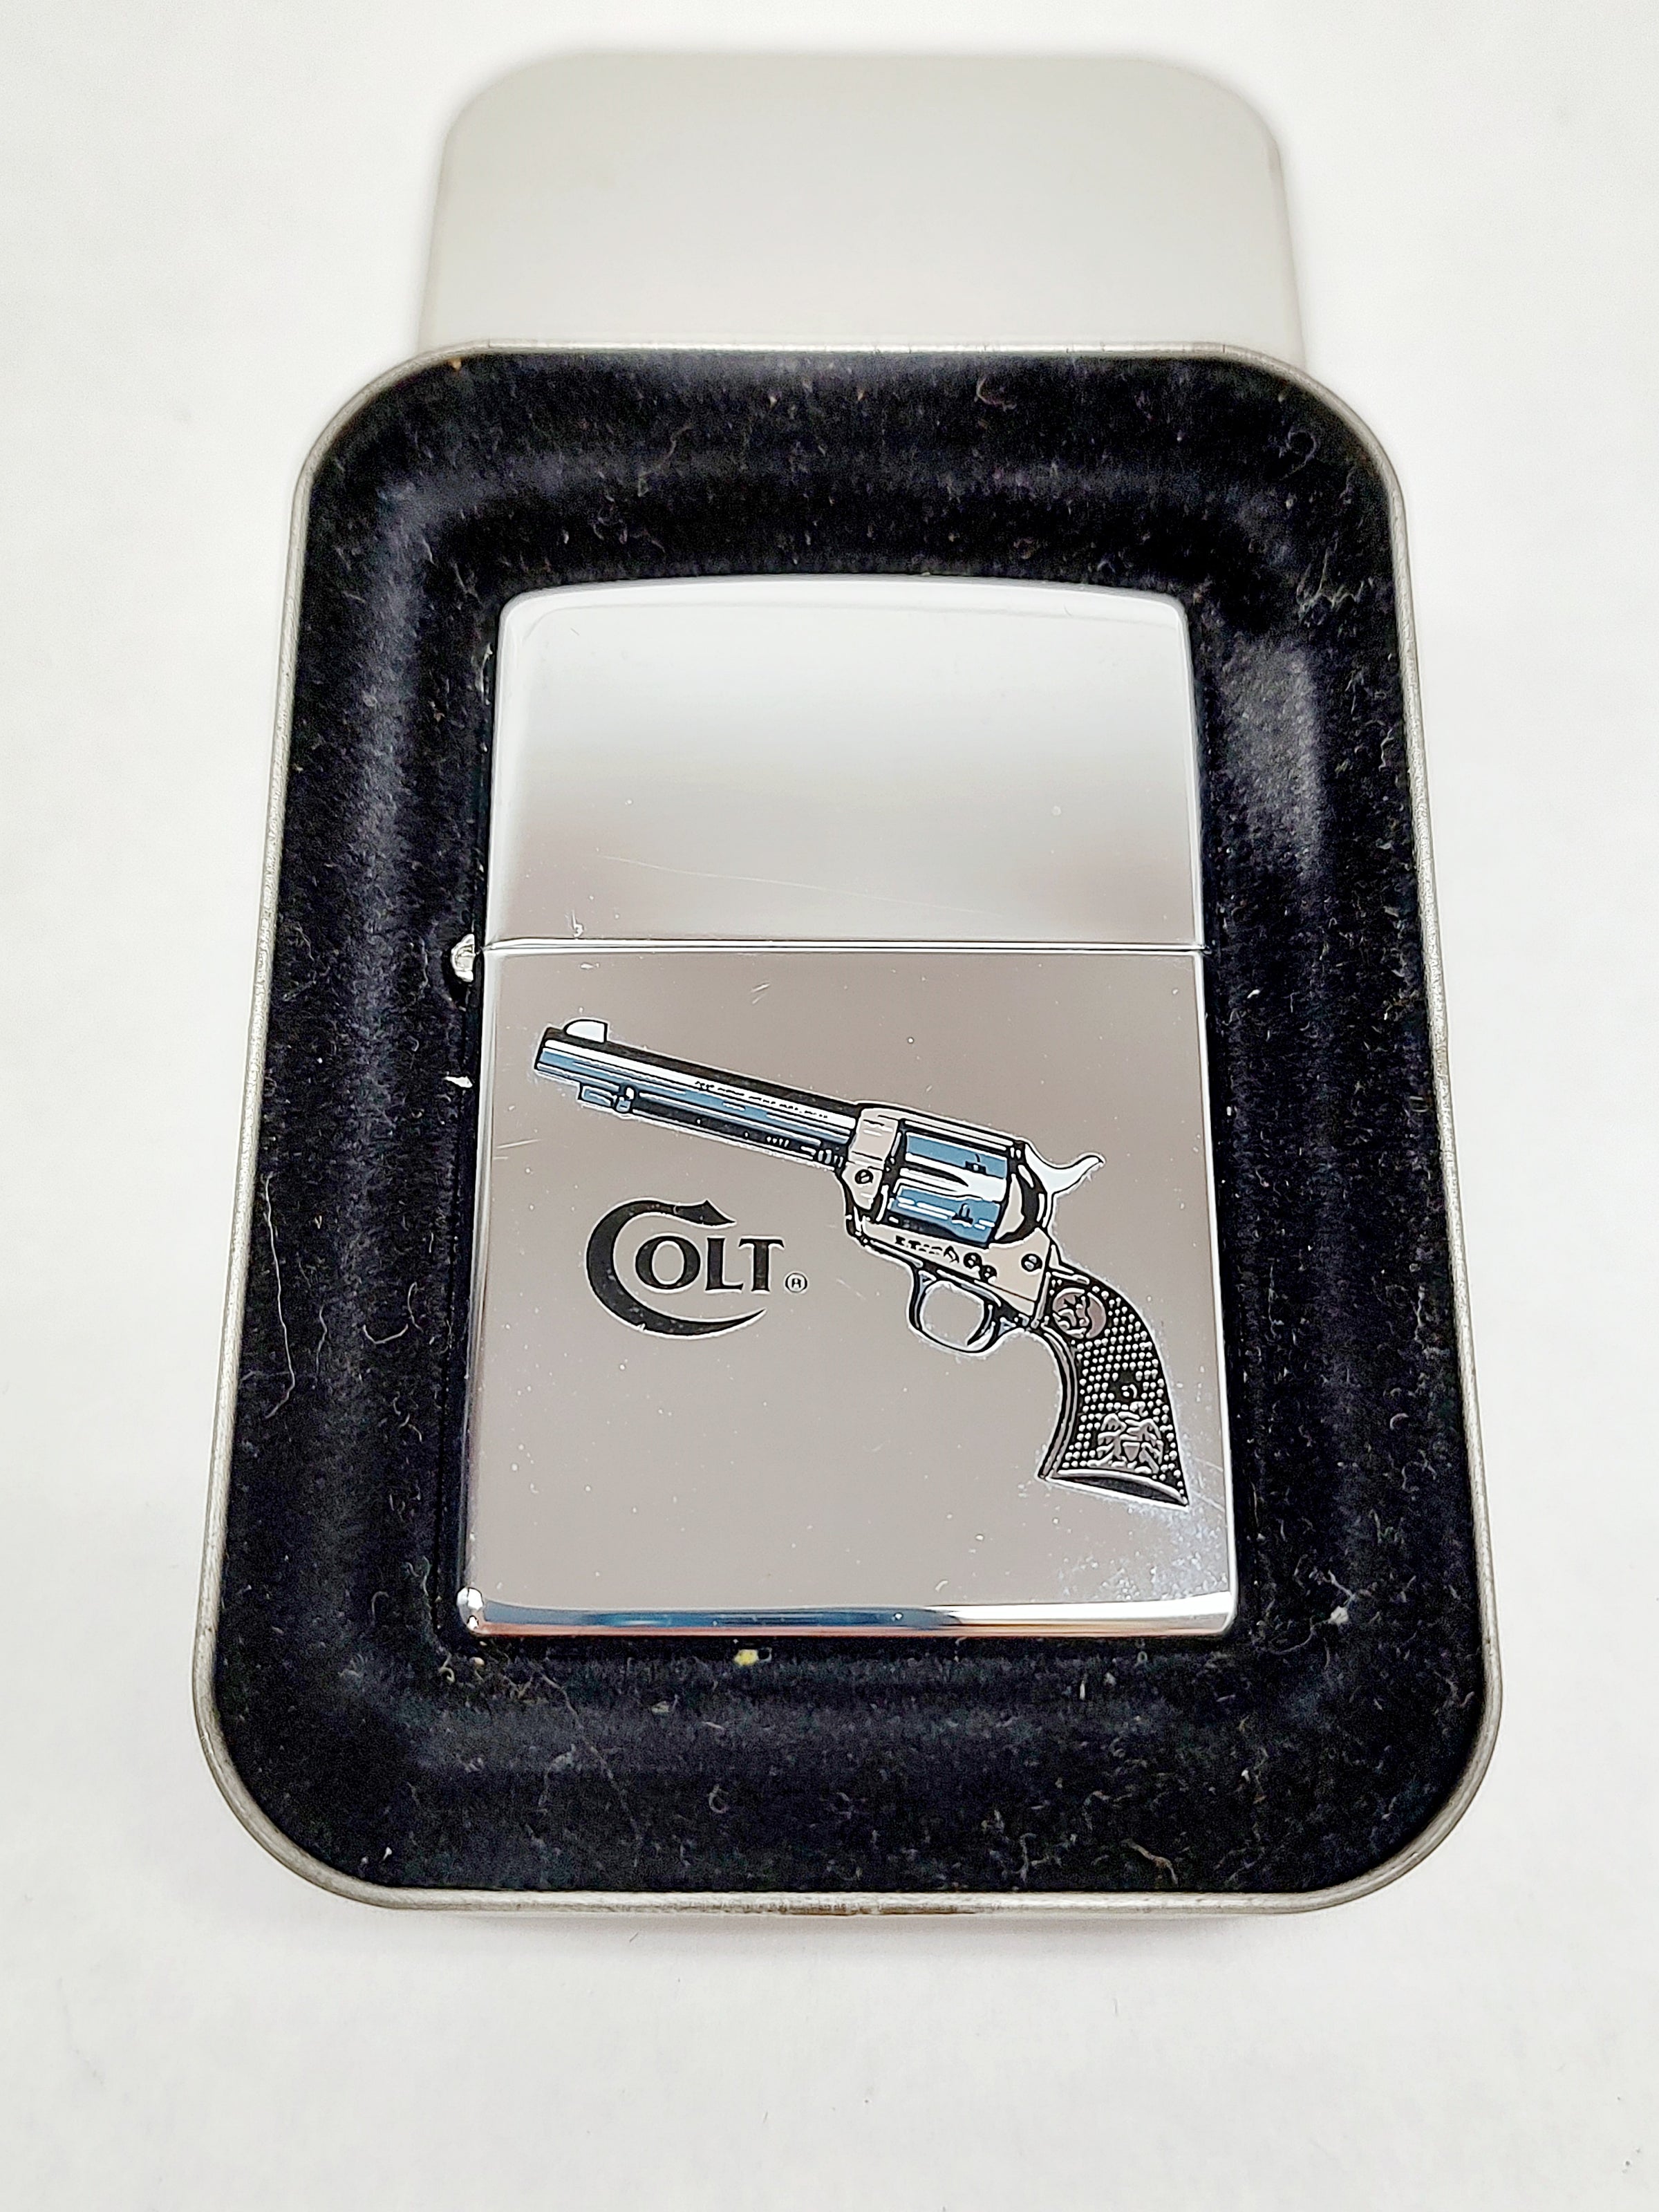 New 1998 XIV Peacemaker Colt Revolver Zippo Lighter - Hers and His Treasures